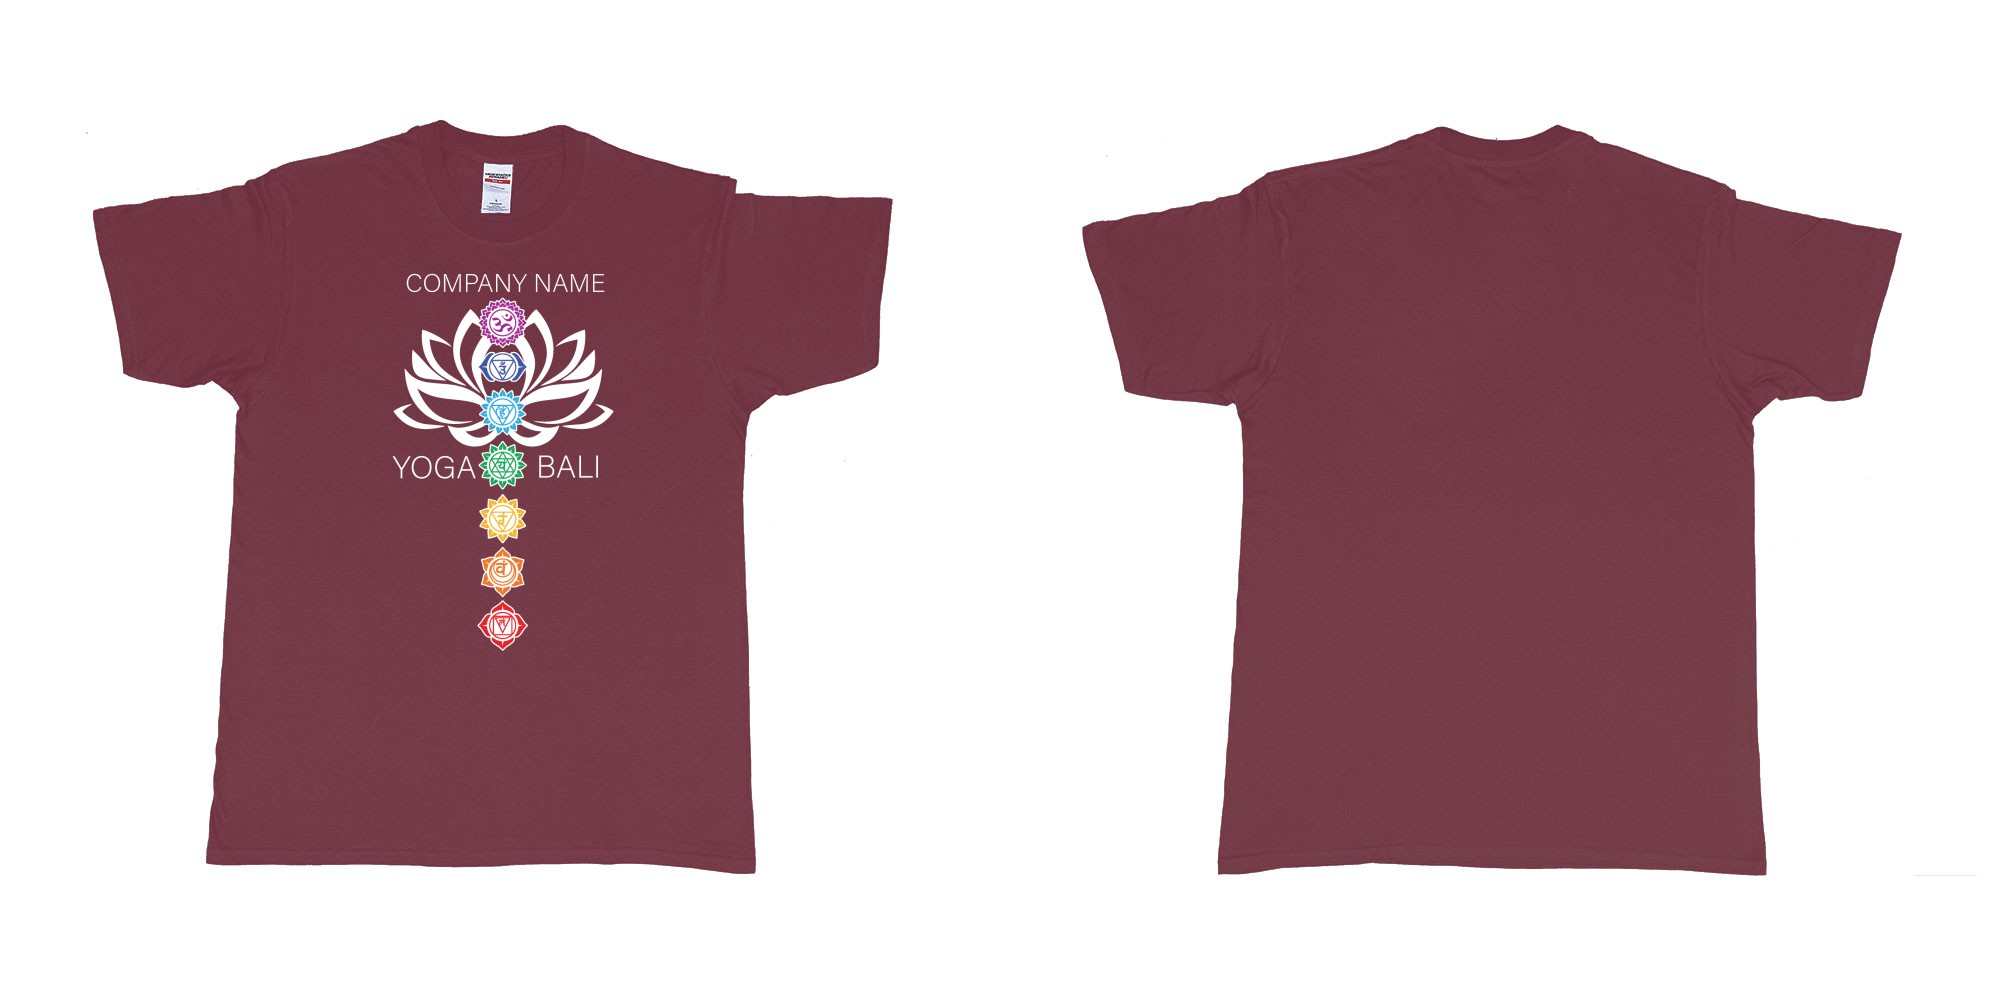 Custom tshirt design lotus flower chakras yoga hindi symbols for custom teeshirt printing in fabric color marron choice your own text made in Bali by The Pirate Way